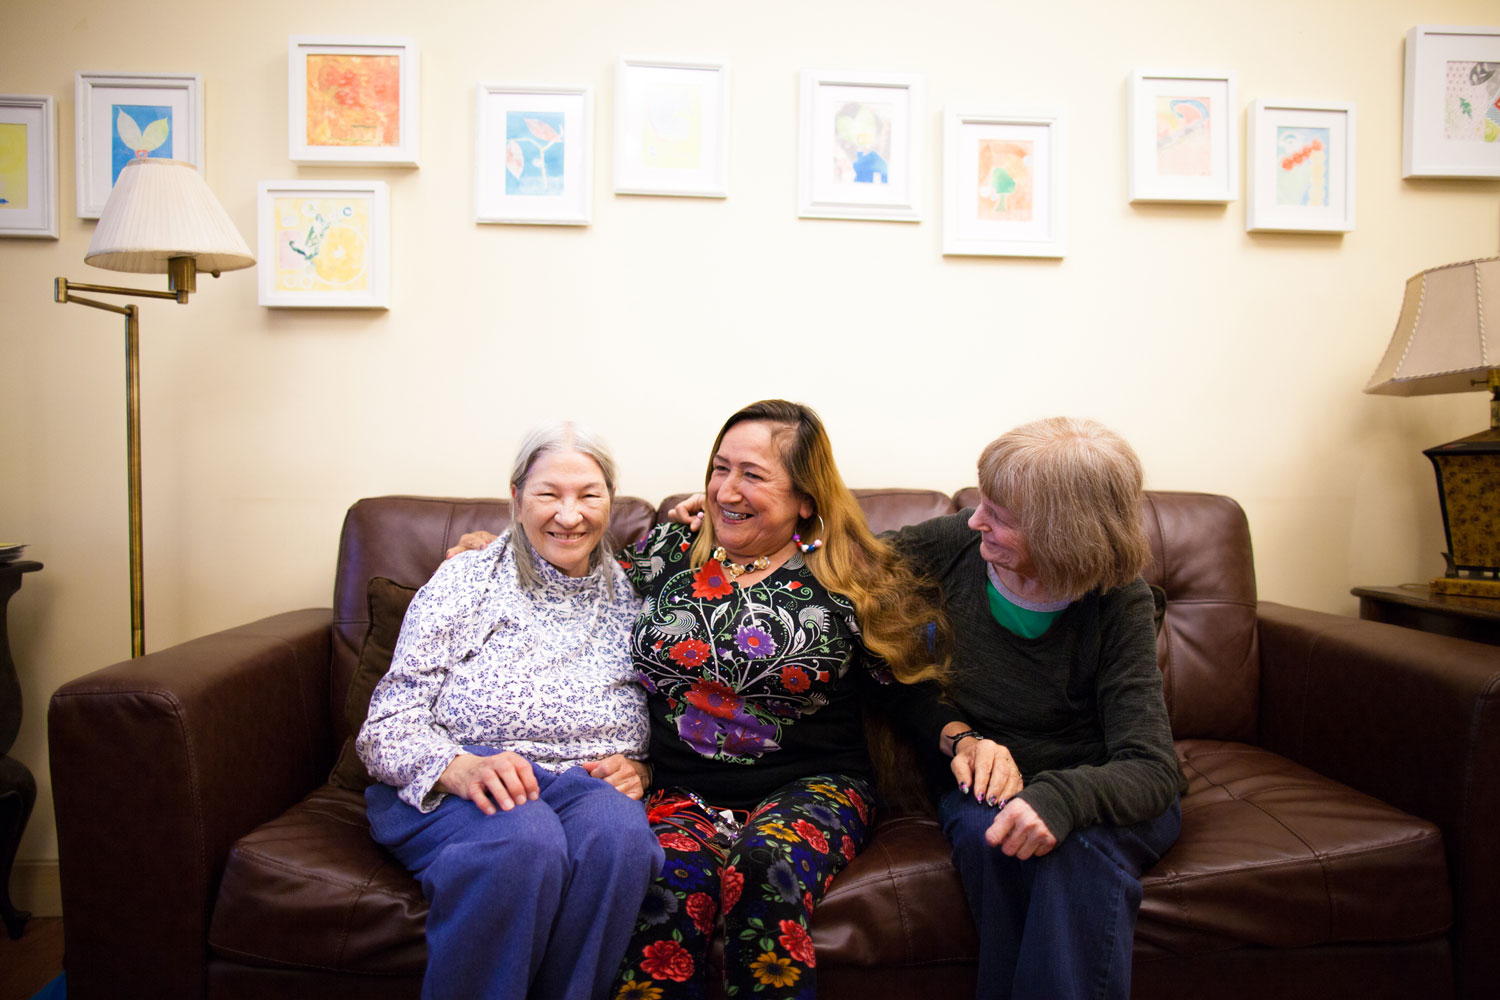 DWC provides comfortable spaces for women to build community with one another.